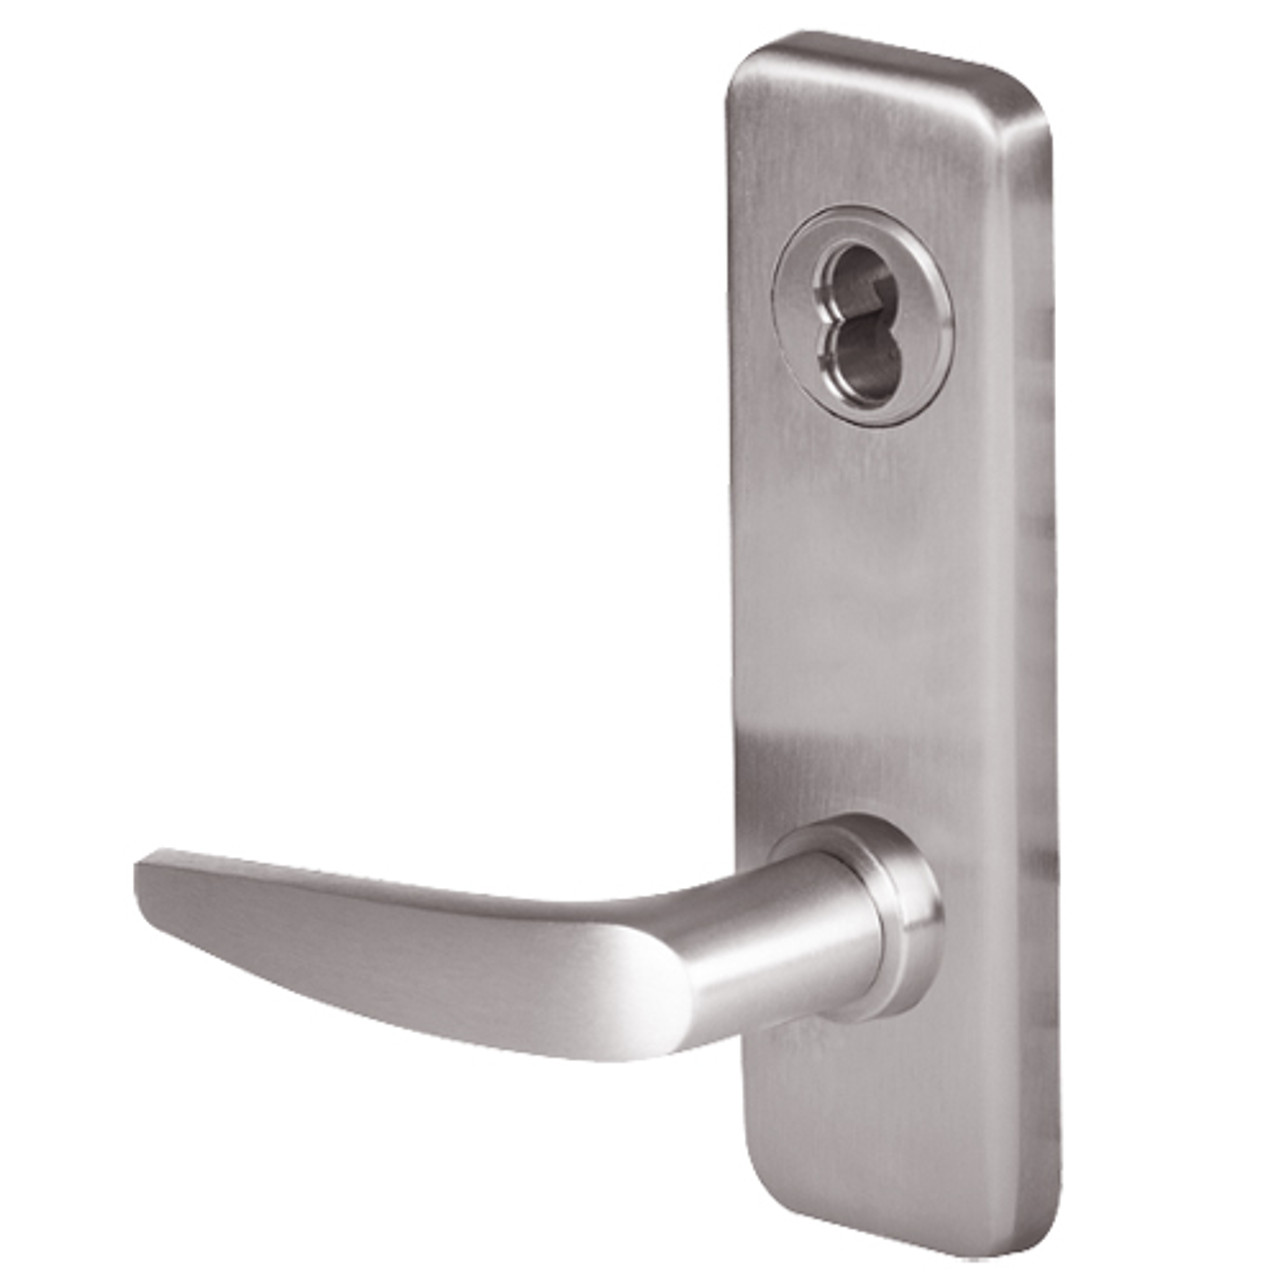 45HW7TWEL16J630RQE12V Best 40HW series Double Key Deadbolt Fail Safe Electromechanical Mortise Lever Lock with Curved w/ No Return Style in Satin Stainless Steel